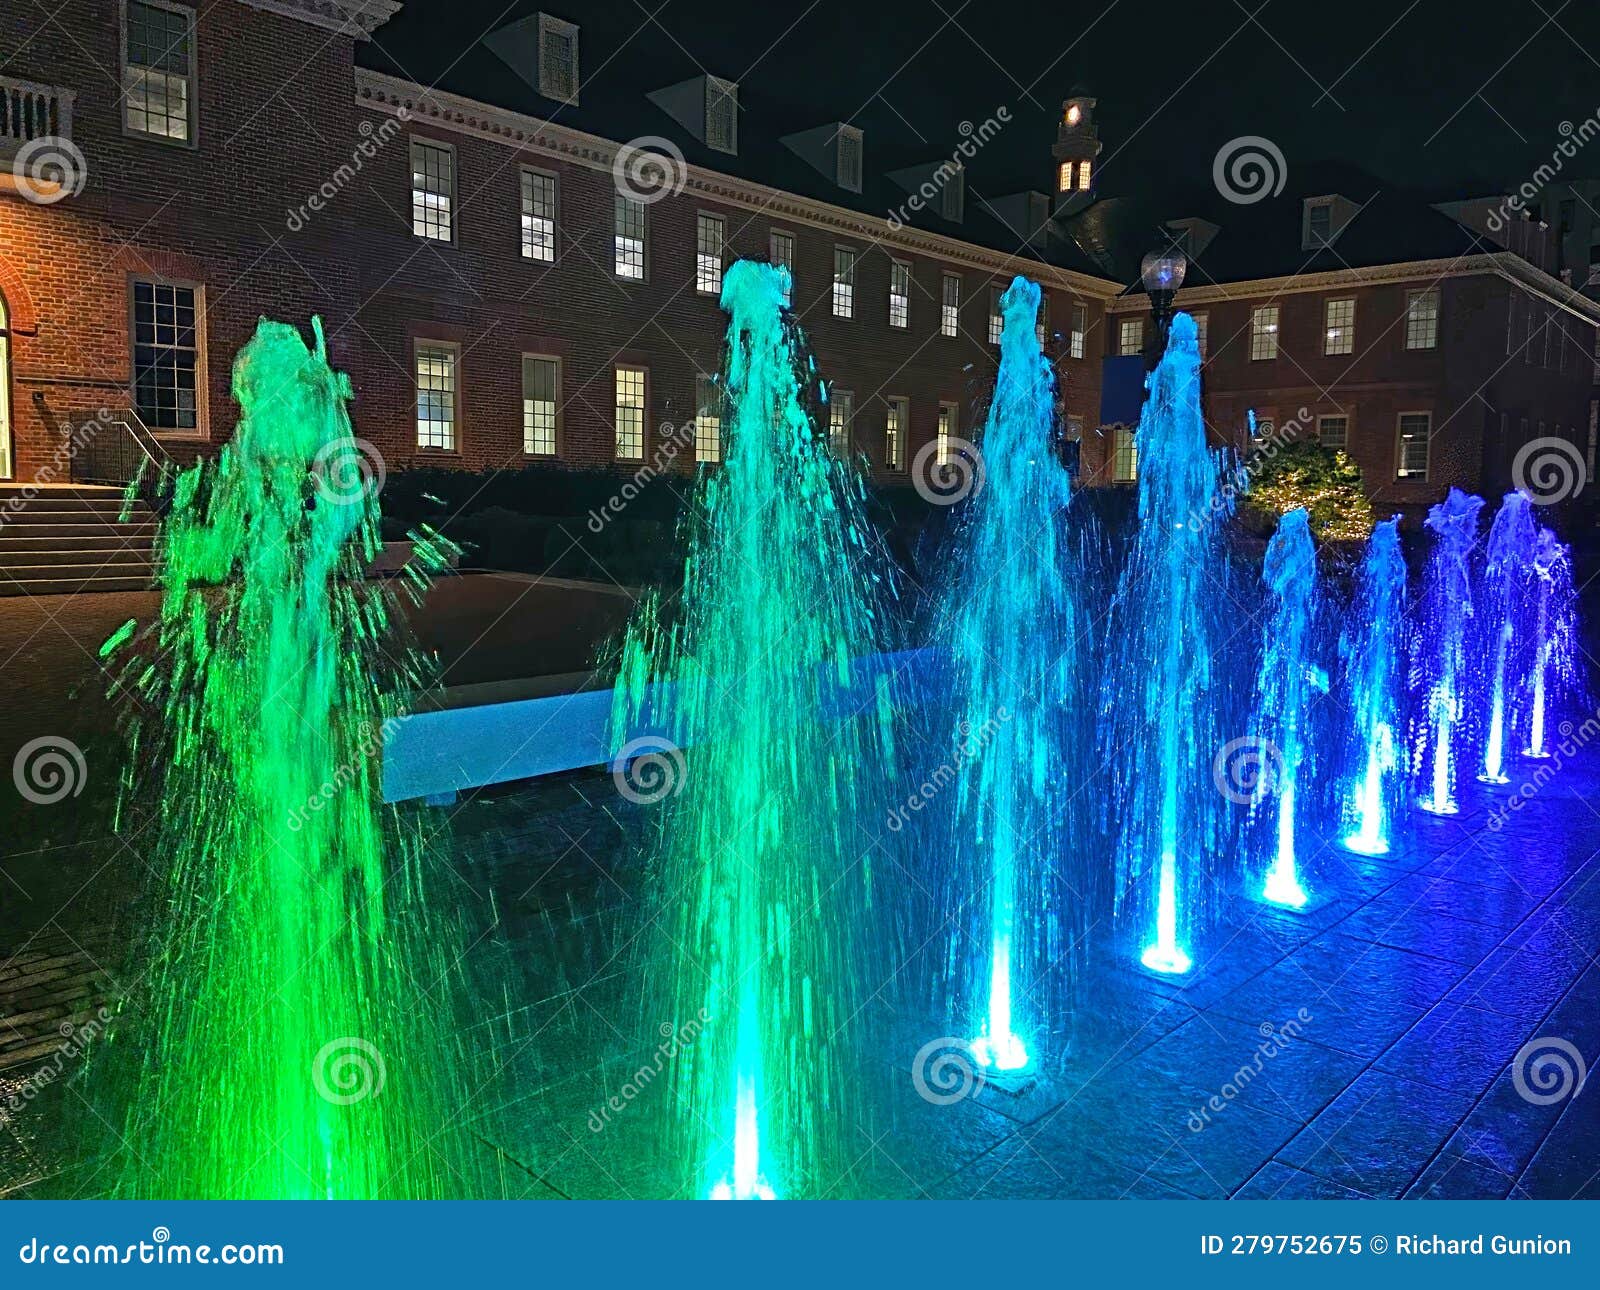 colorful water jets and old fannie mae building at night in washington dc